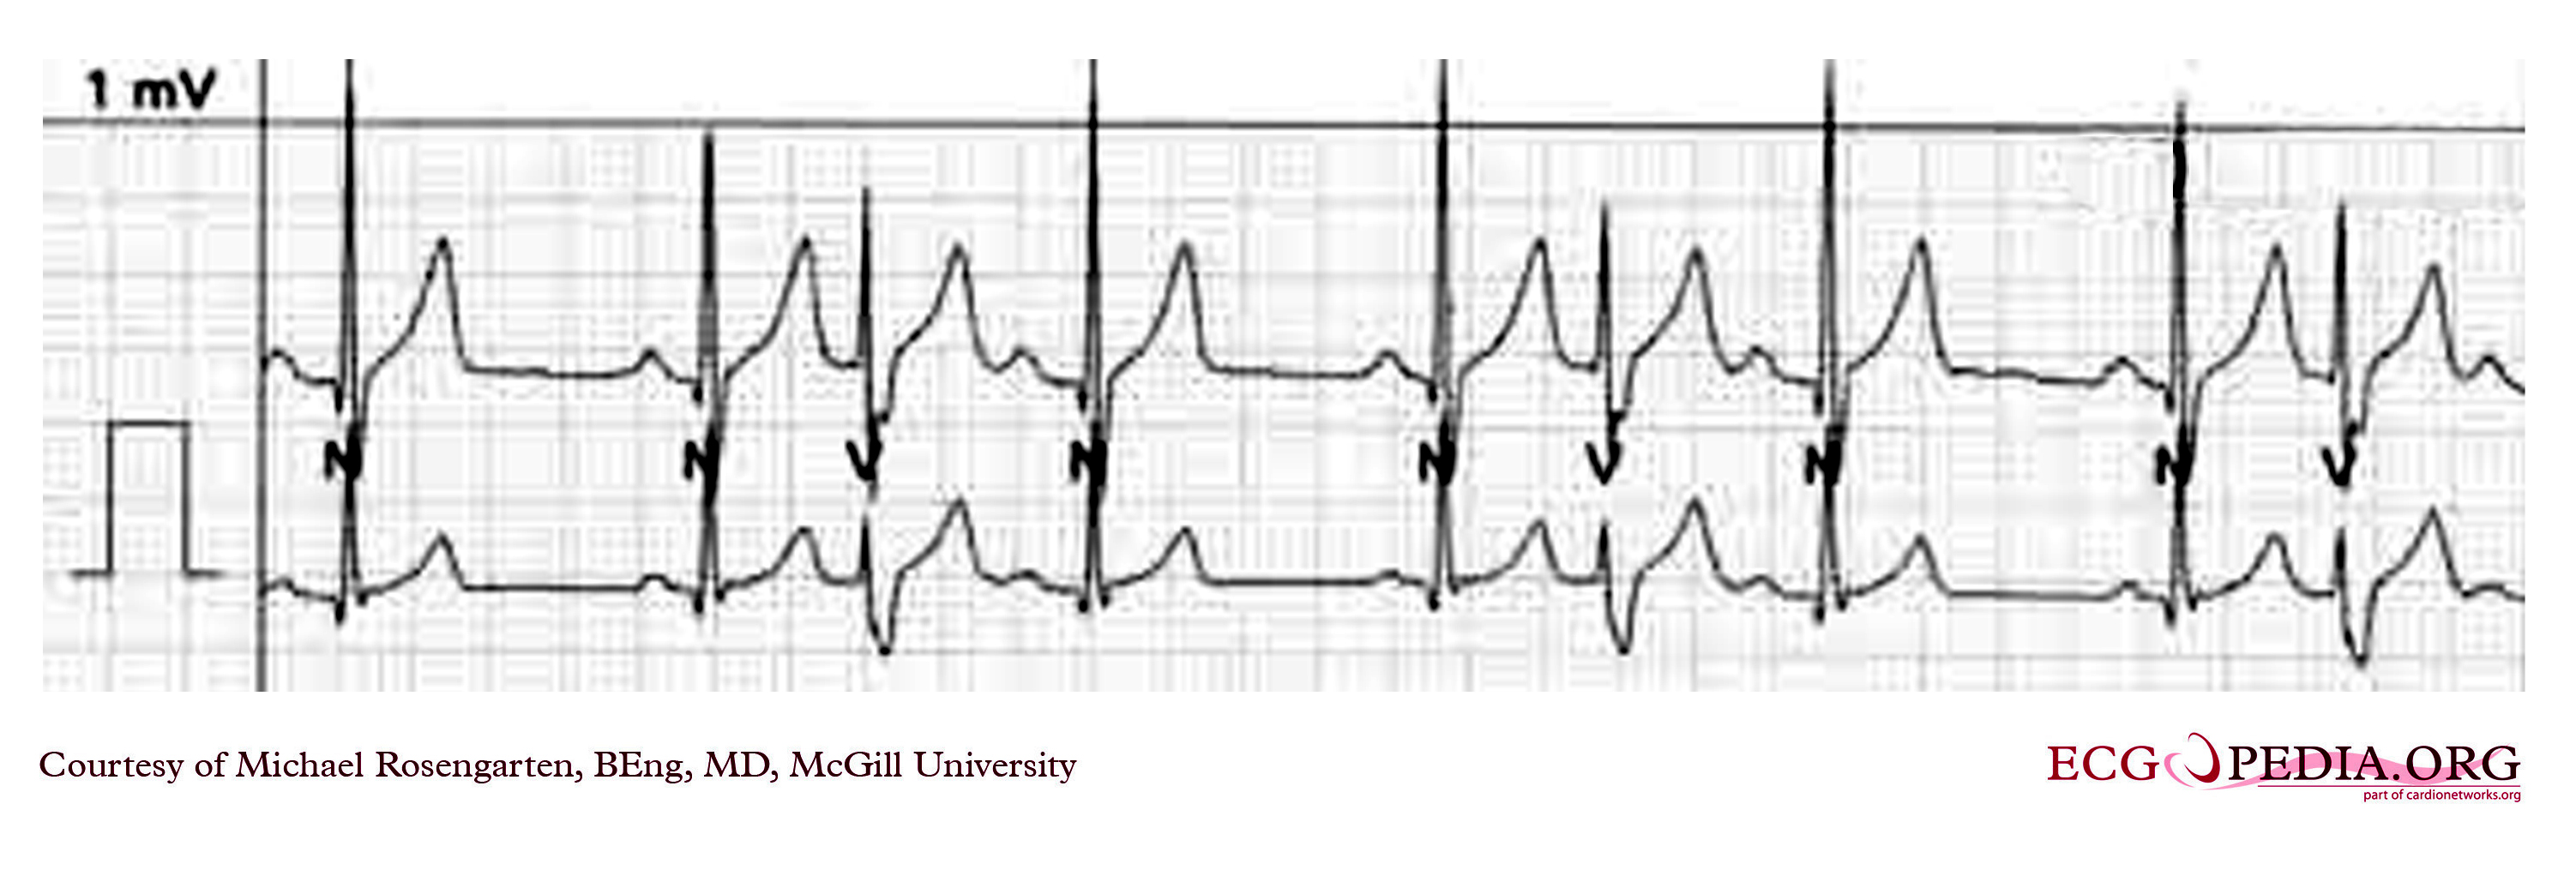 File:Premature Ventricular Contractions with trigeminal rhythm.jpg